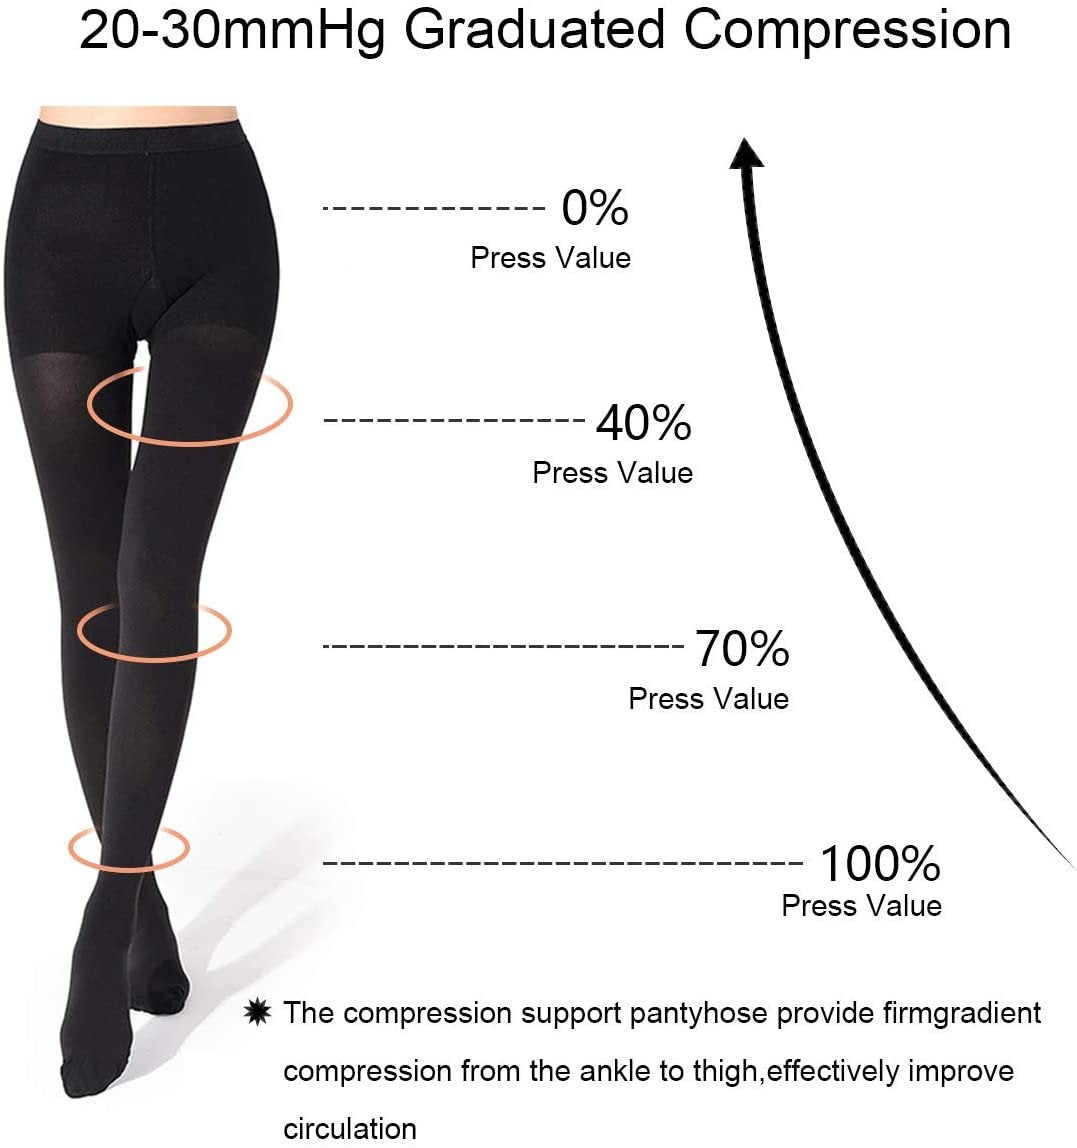 Thigh High Compression Stockings for Varicose Veins 20 30 mmhg – CARERSPK